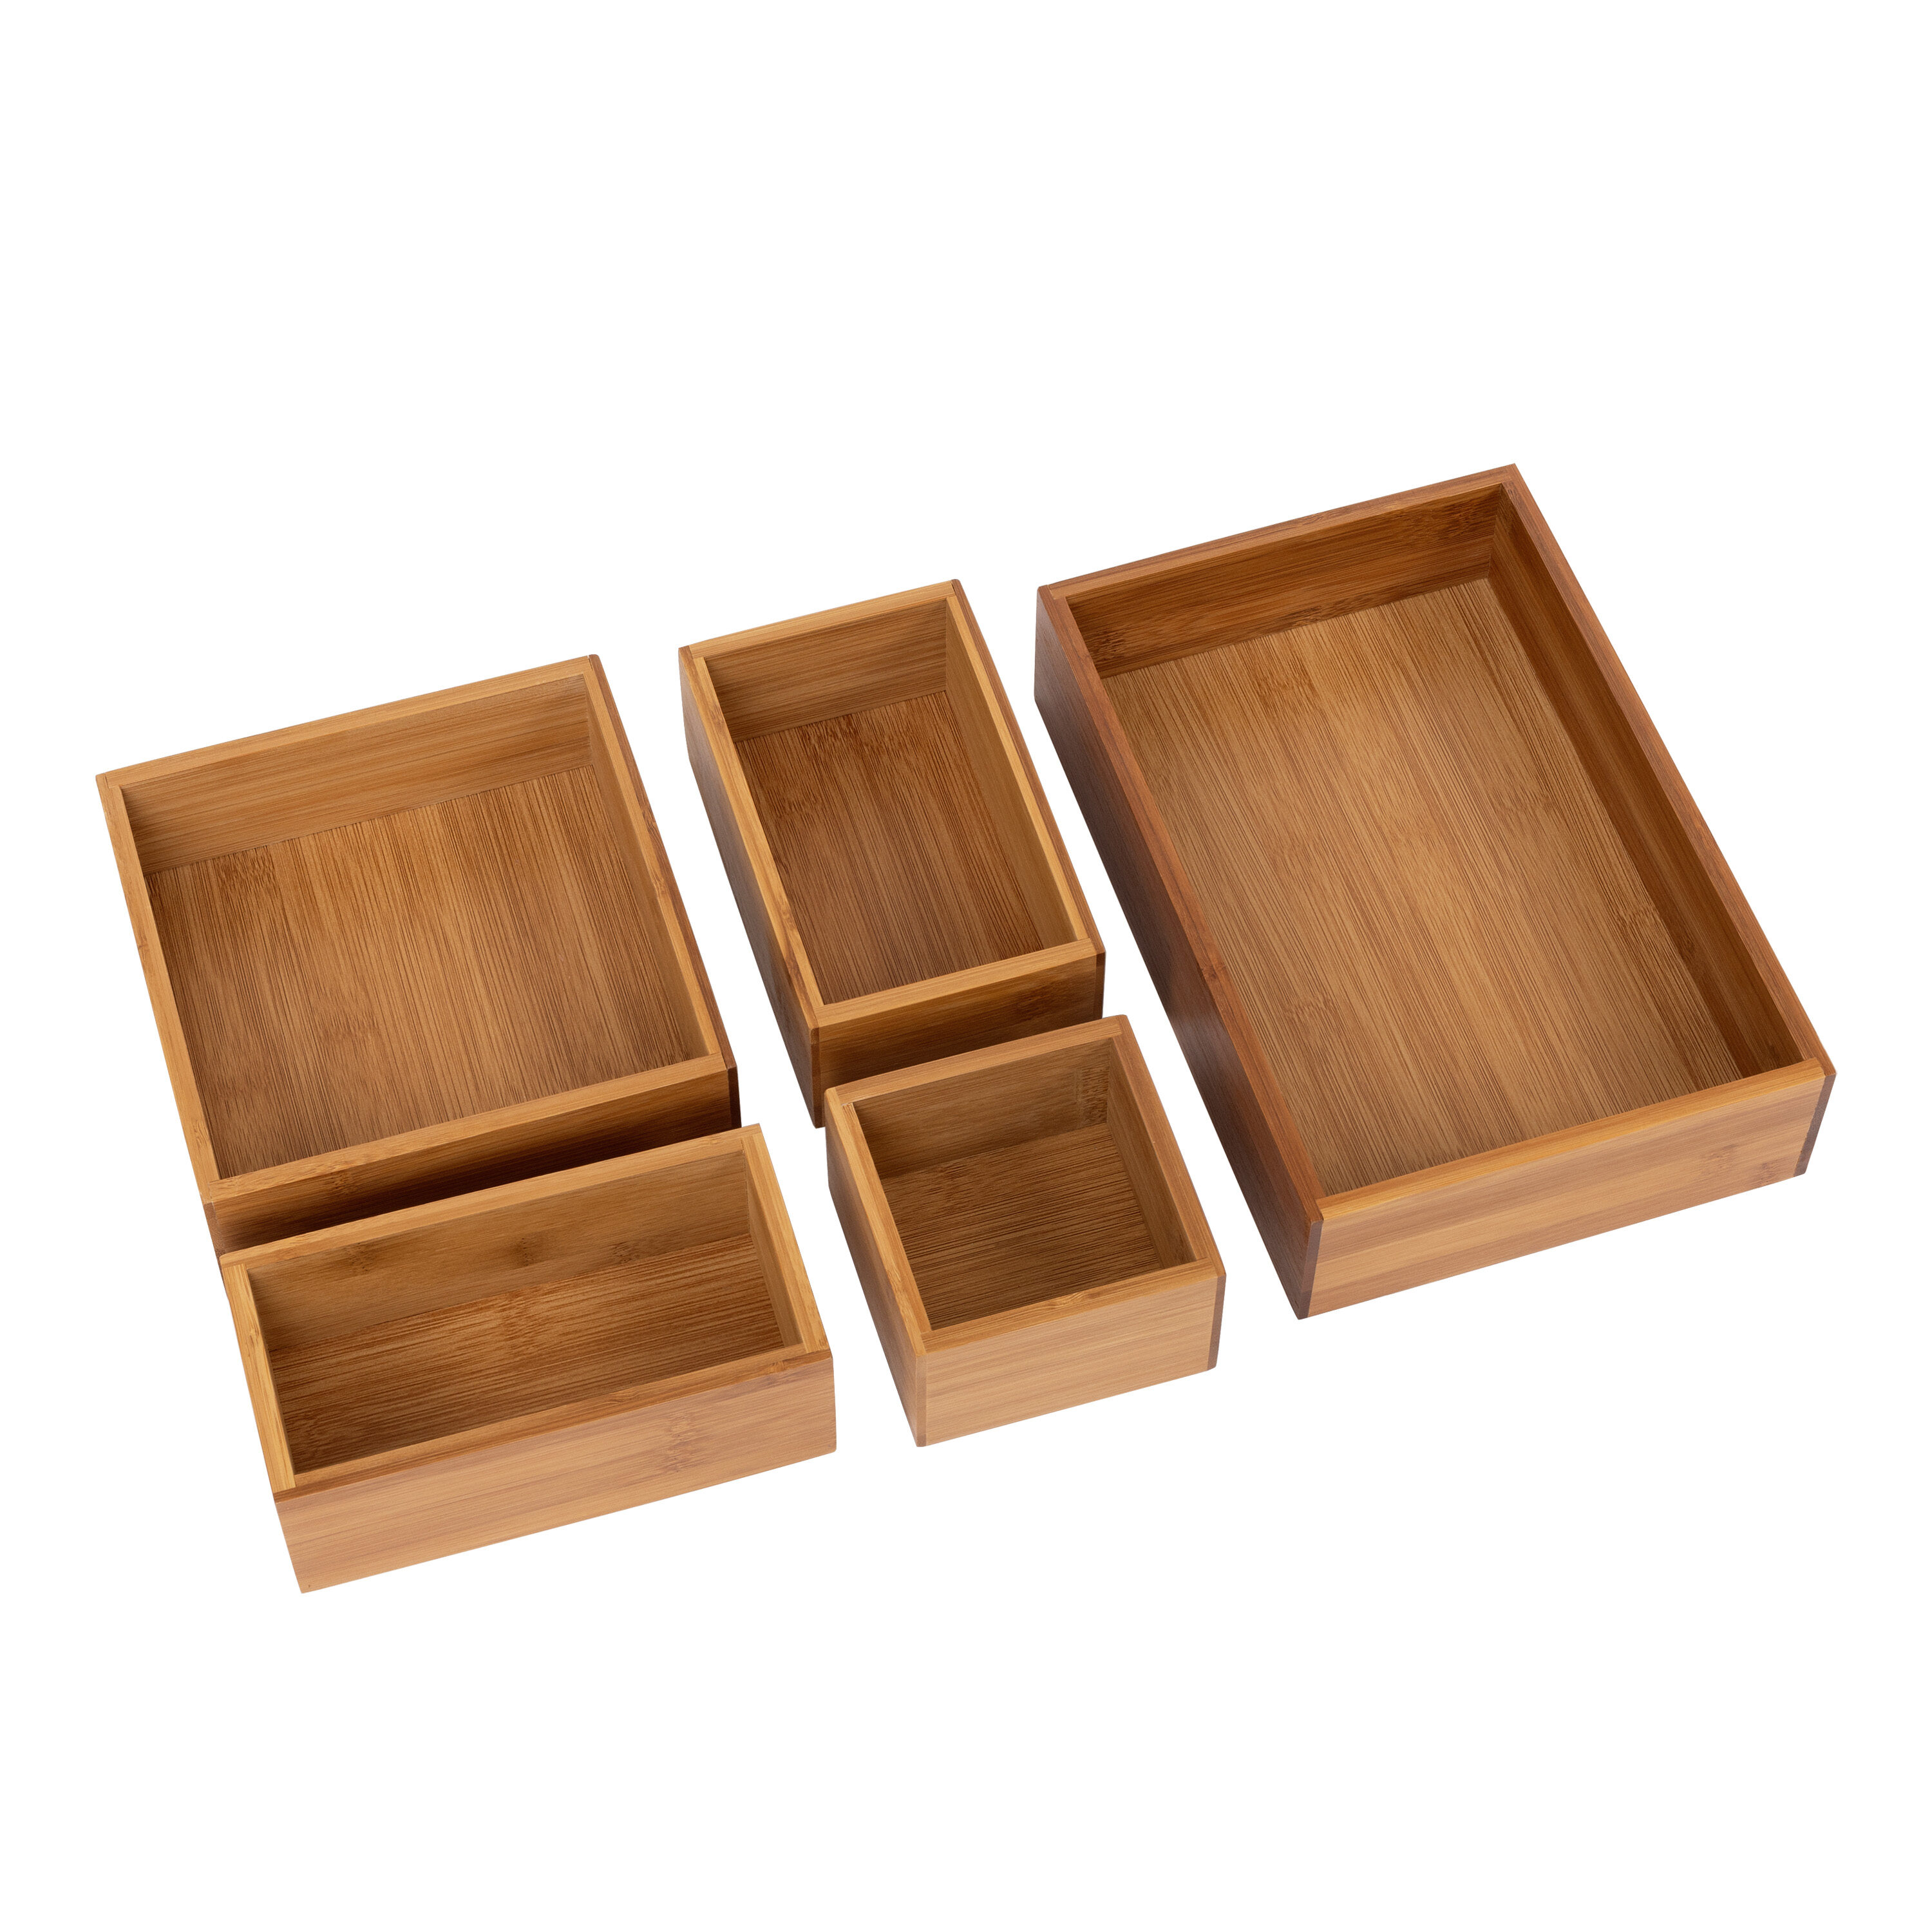 Hastings Home 5-PC Bamboo Bathroom Accessories Set - Brown